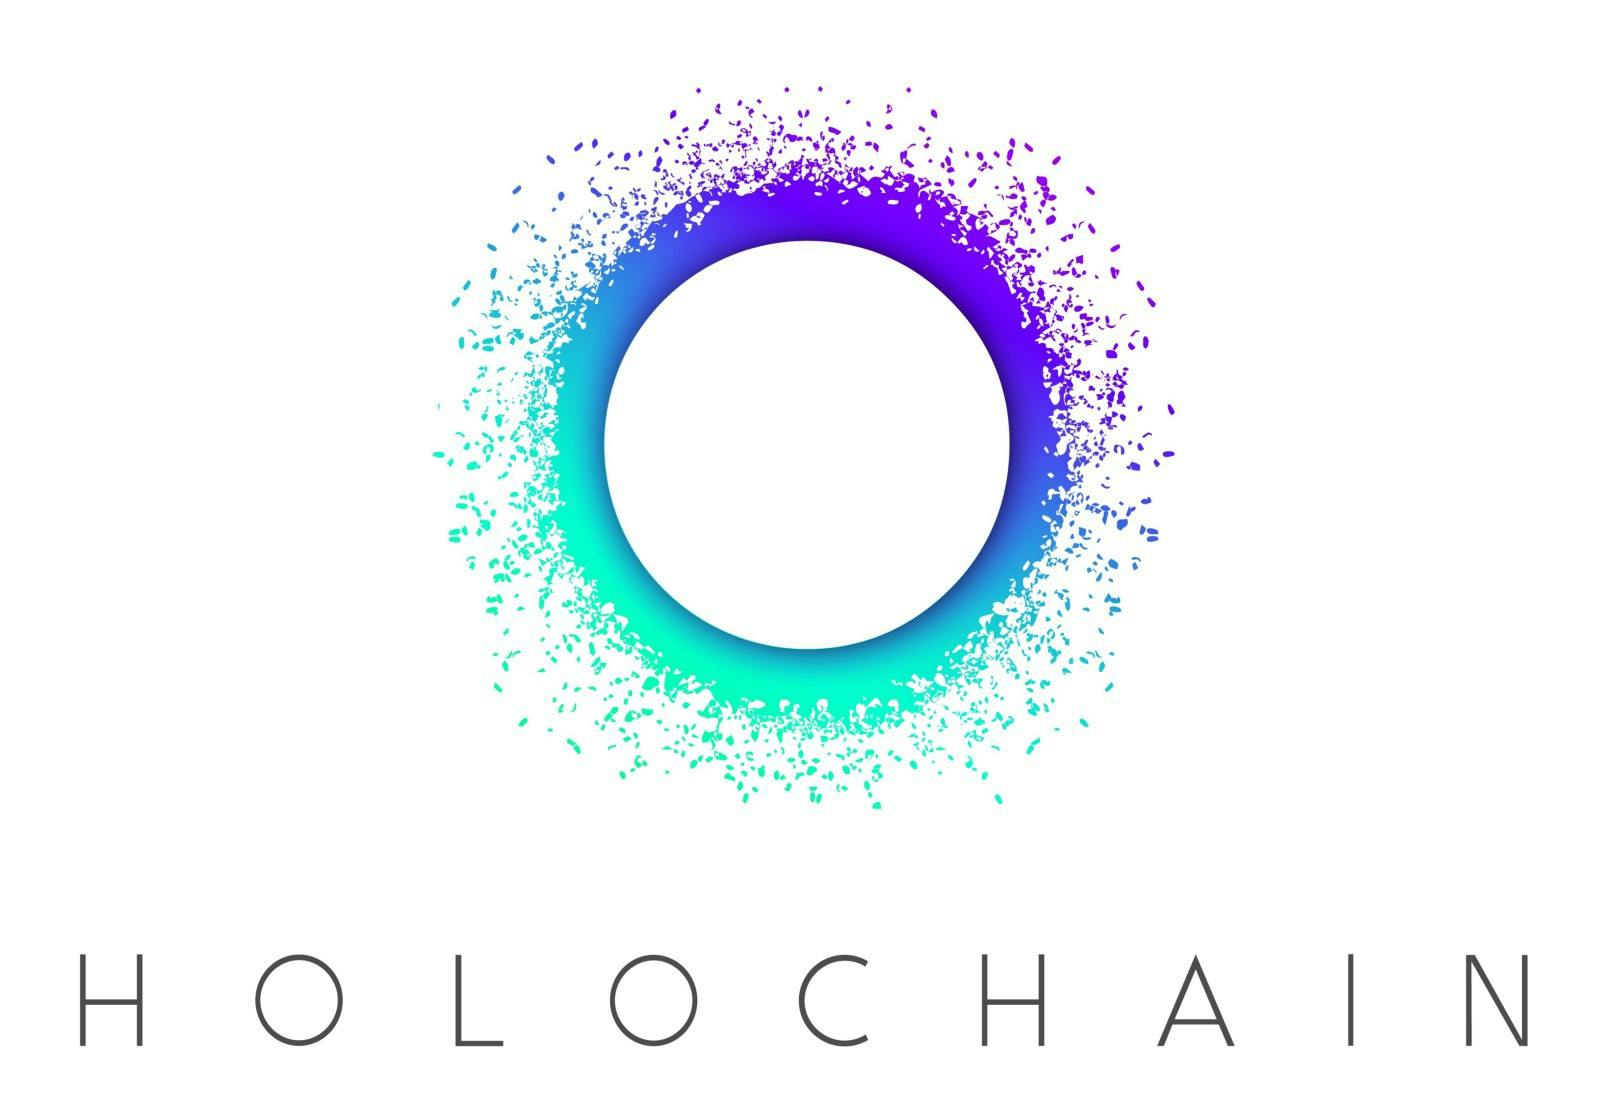 /holochain-a-new-way-of-thinking-about-society-and-distributed-systems-dc9b414b5ff1 feature image